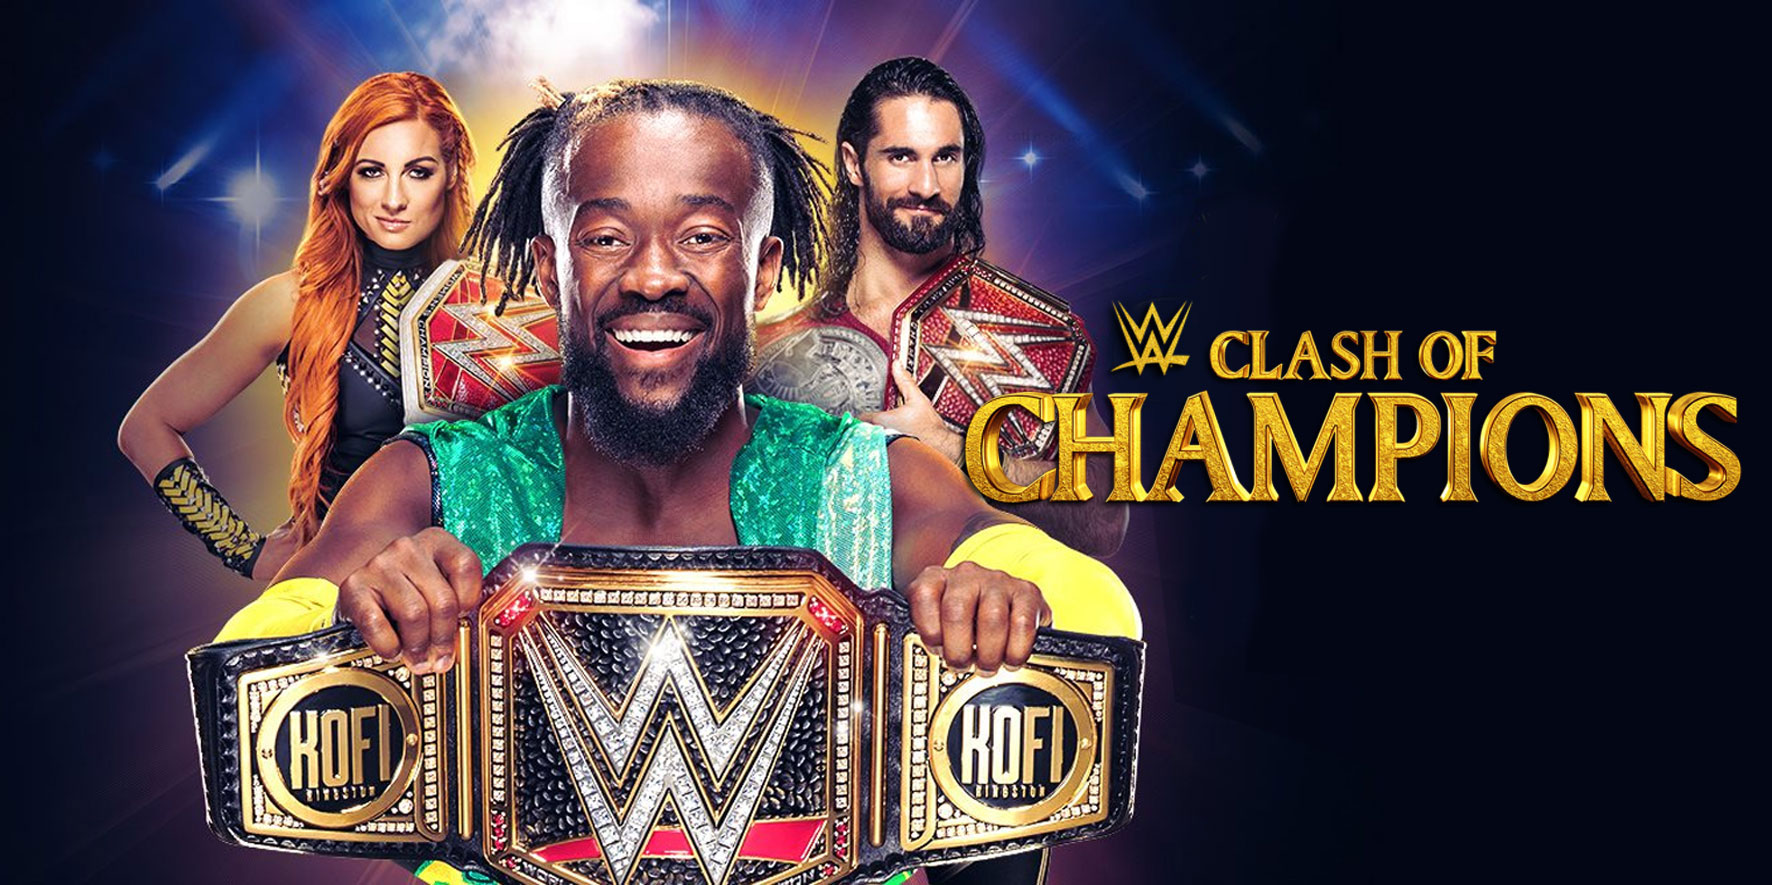 5 Unknown facts about WWE Clash of Champions 2019